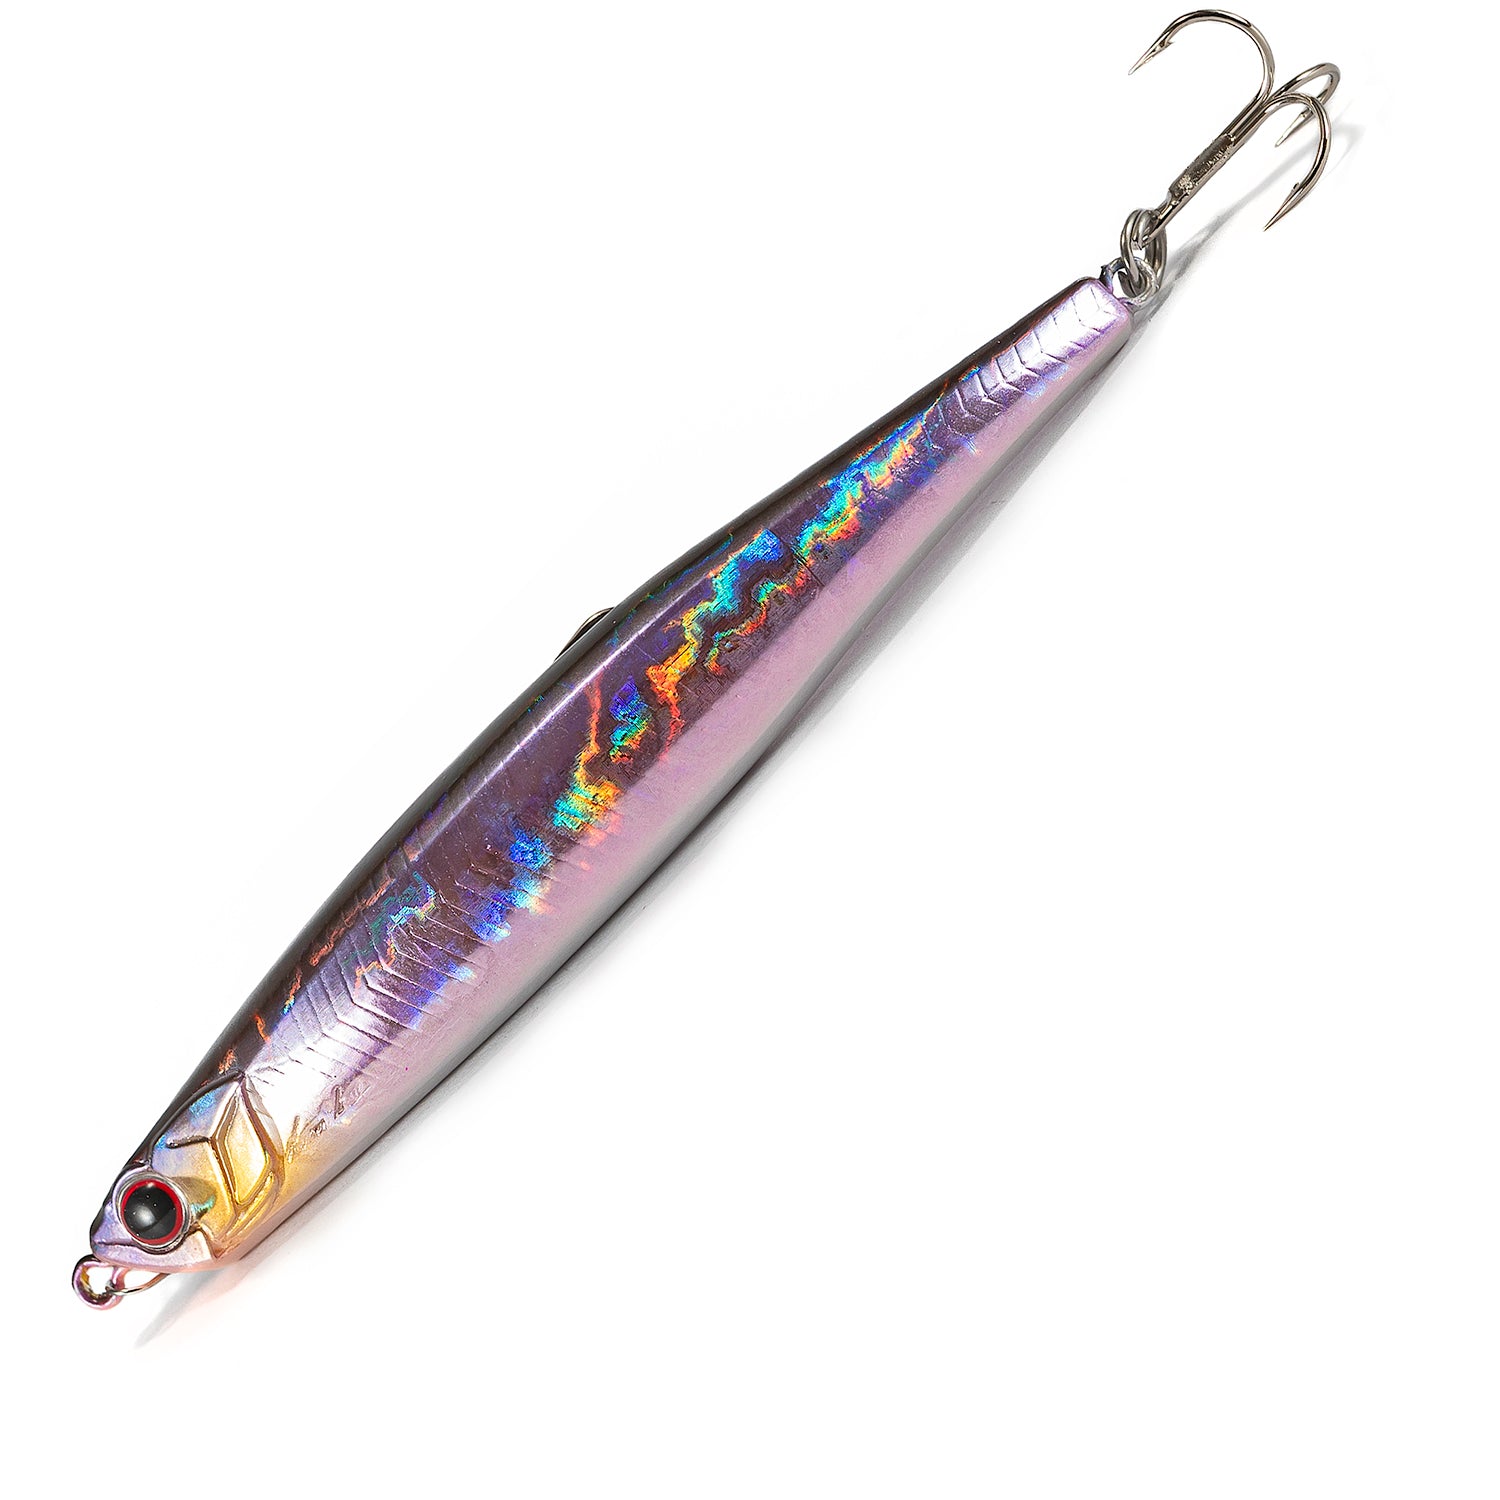 OSP Bent Minnow 76F - Compleat Angler Nedlands Pro Tackle